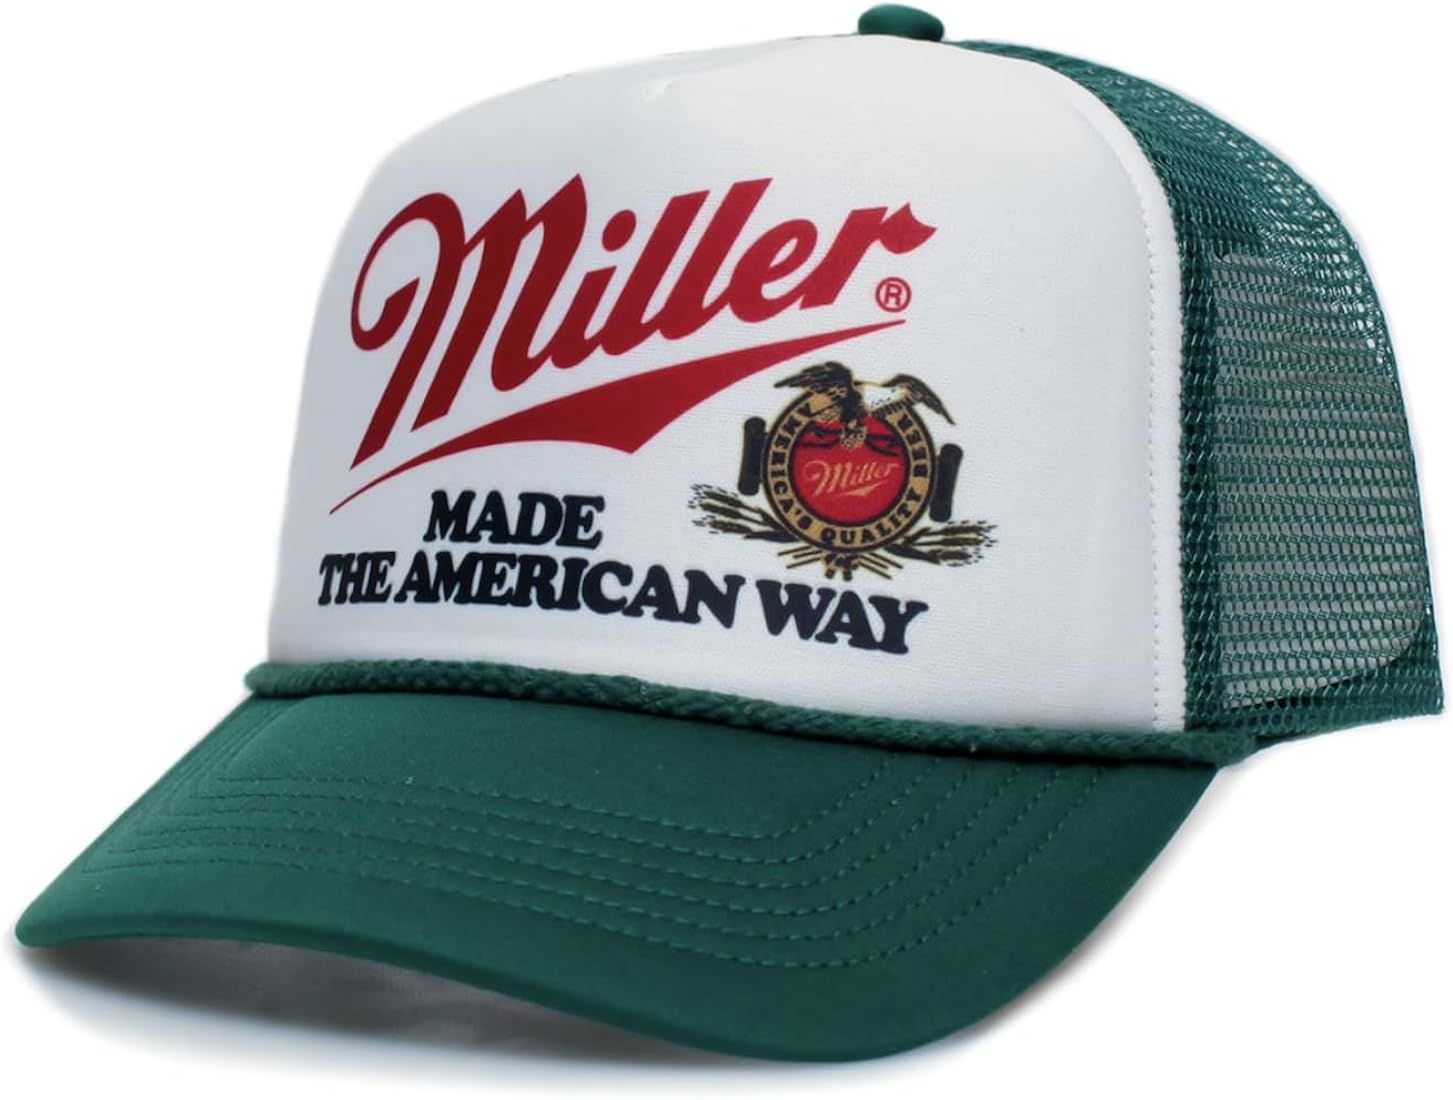 The American Way Trucker Hat - Trendy Vintage Beer Graphic Mesh Back Trucker Cap for Men and Wome... | Amazon (US)